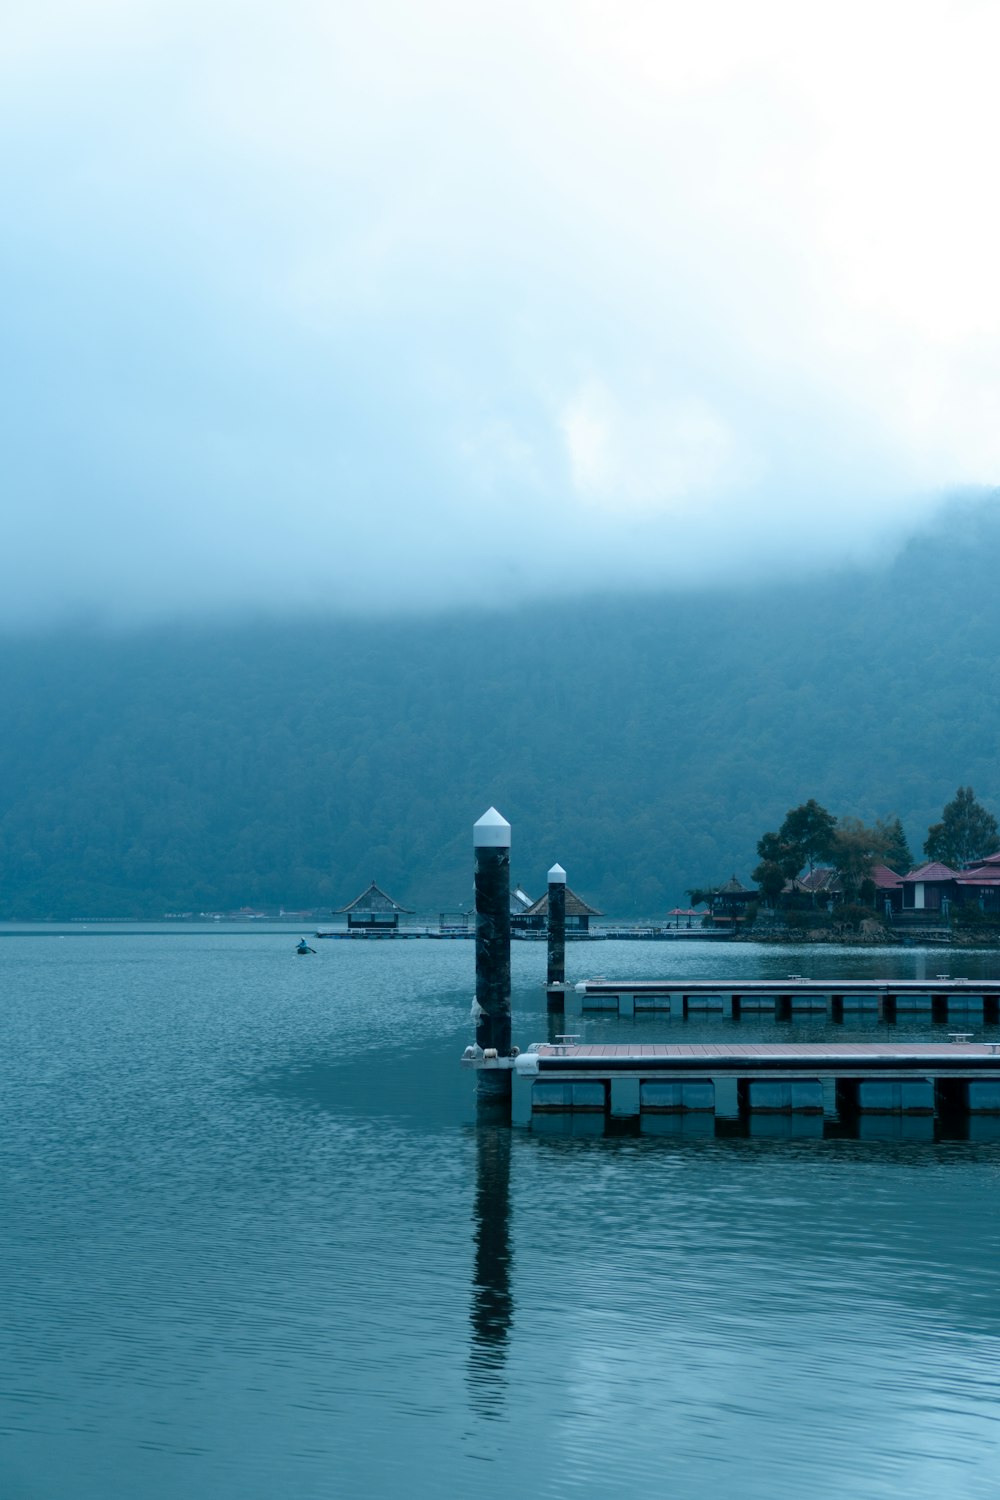 a dock in the middle of a lake with mountains in the background